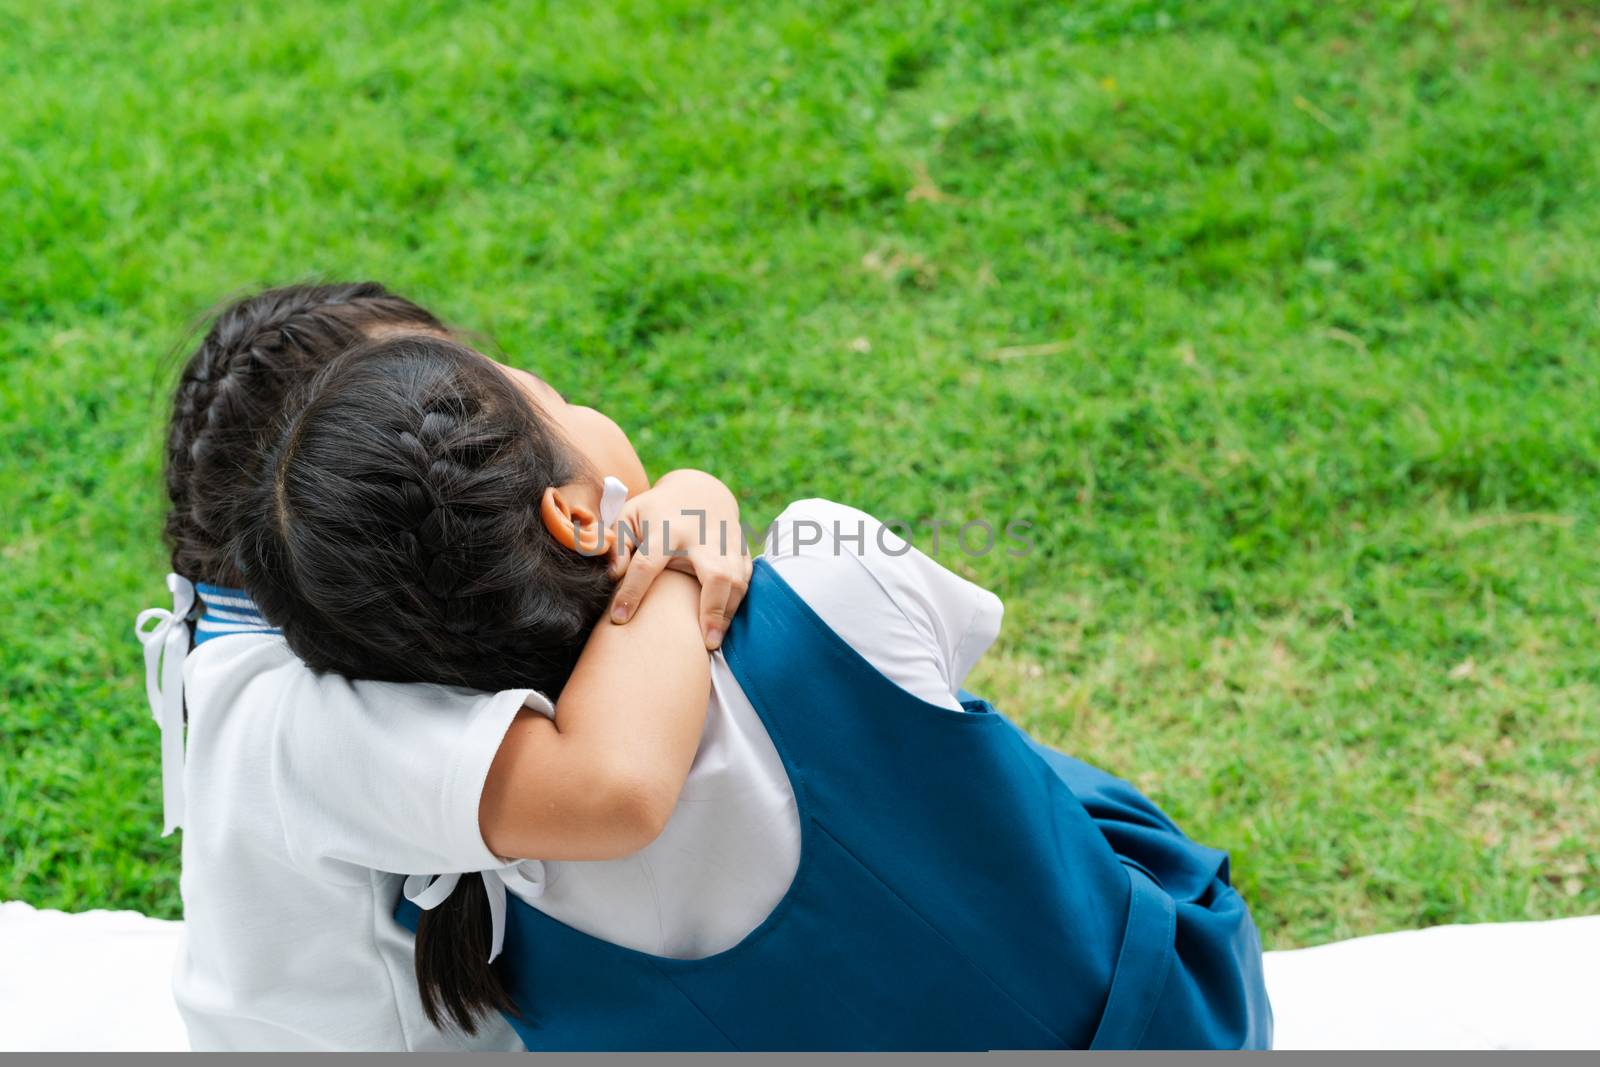 two little asian girls sisters hugging happy post in school uniform, back to school concept